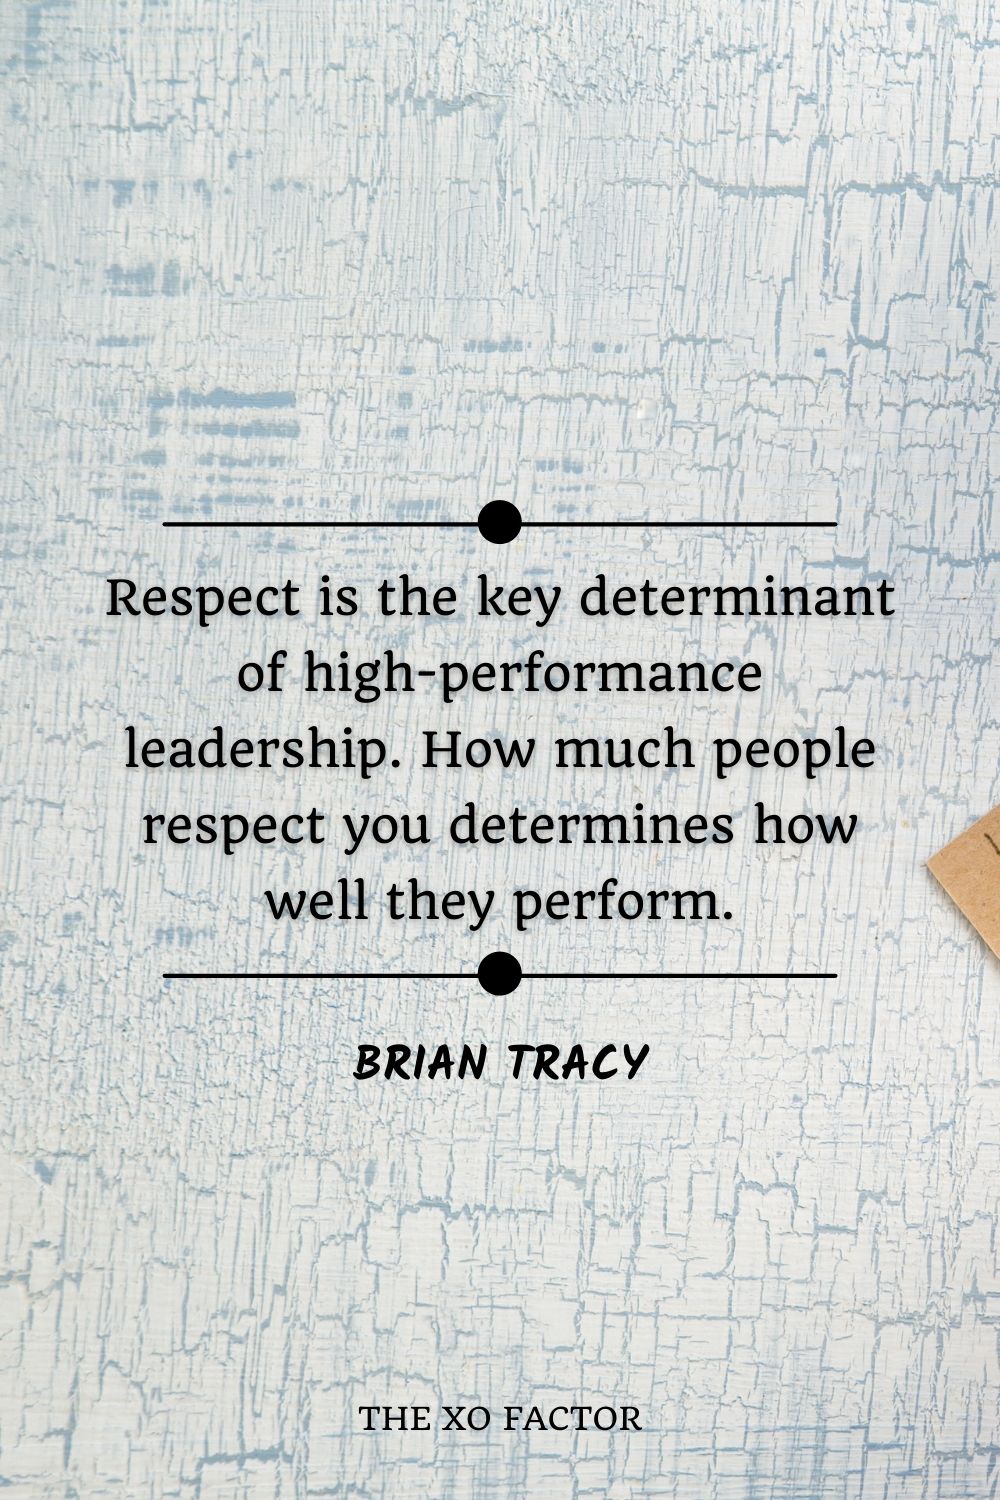 Respect is the key determinant of high-performance leadership. How much people respect you determines how well they perform.” – Brian Tracy